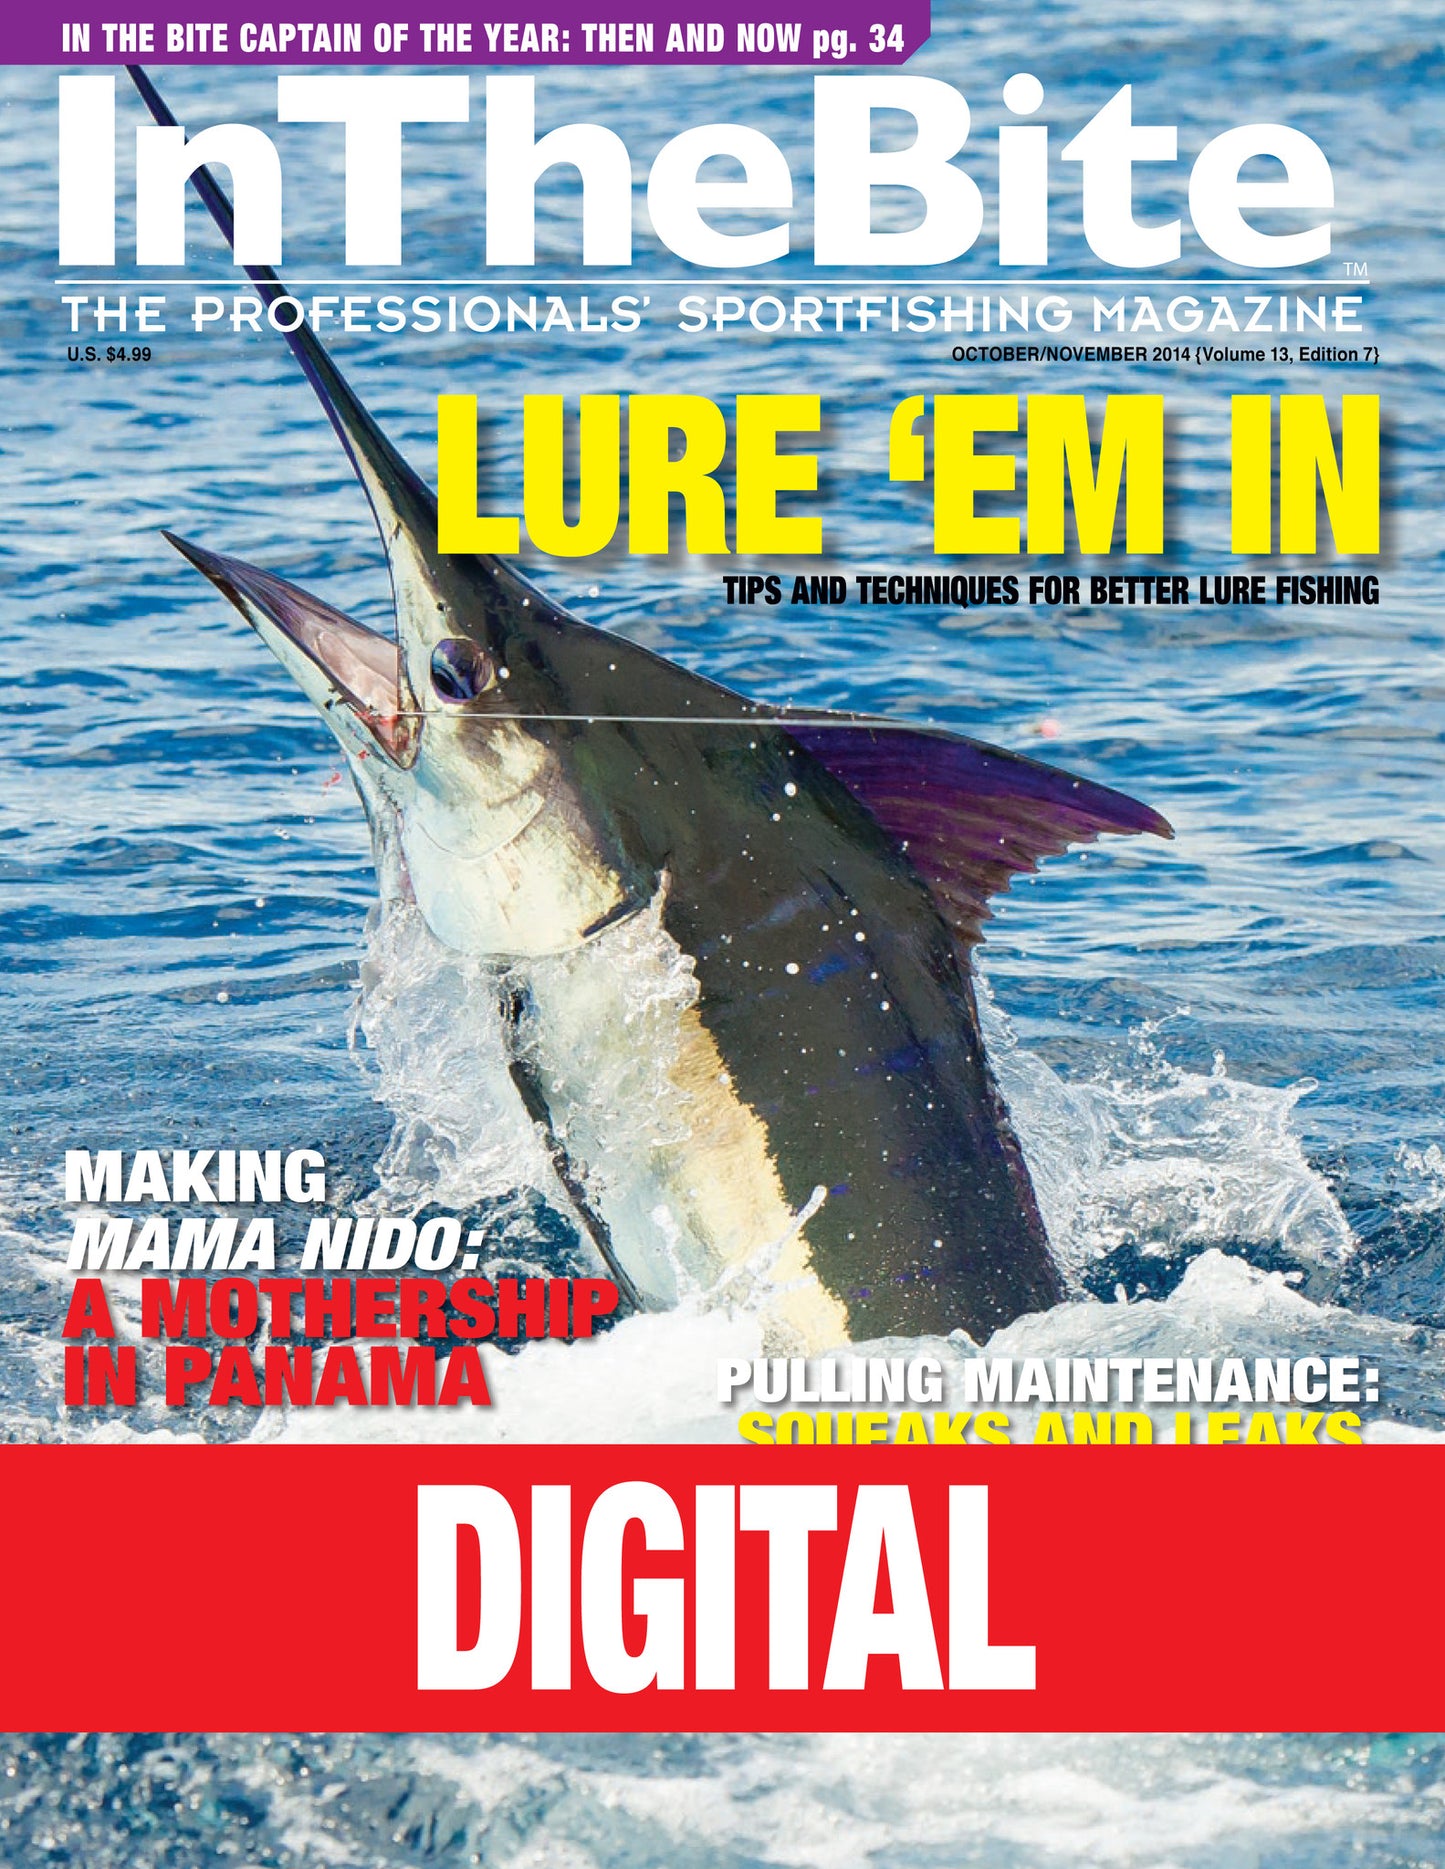 InTheBite Volume 14 Edition 02 - March Issue 2015 - Digital Edition